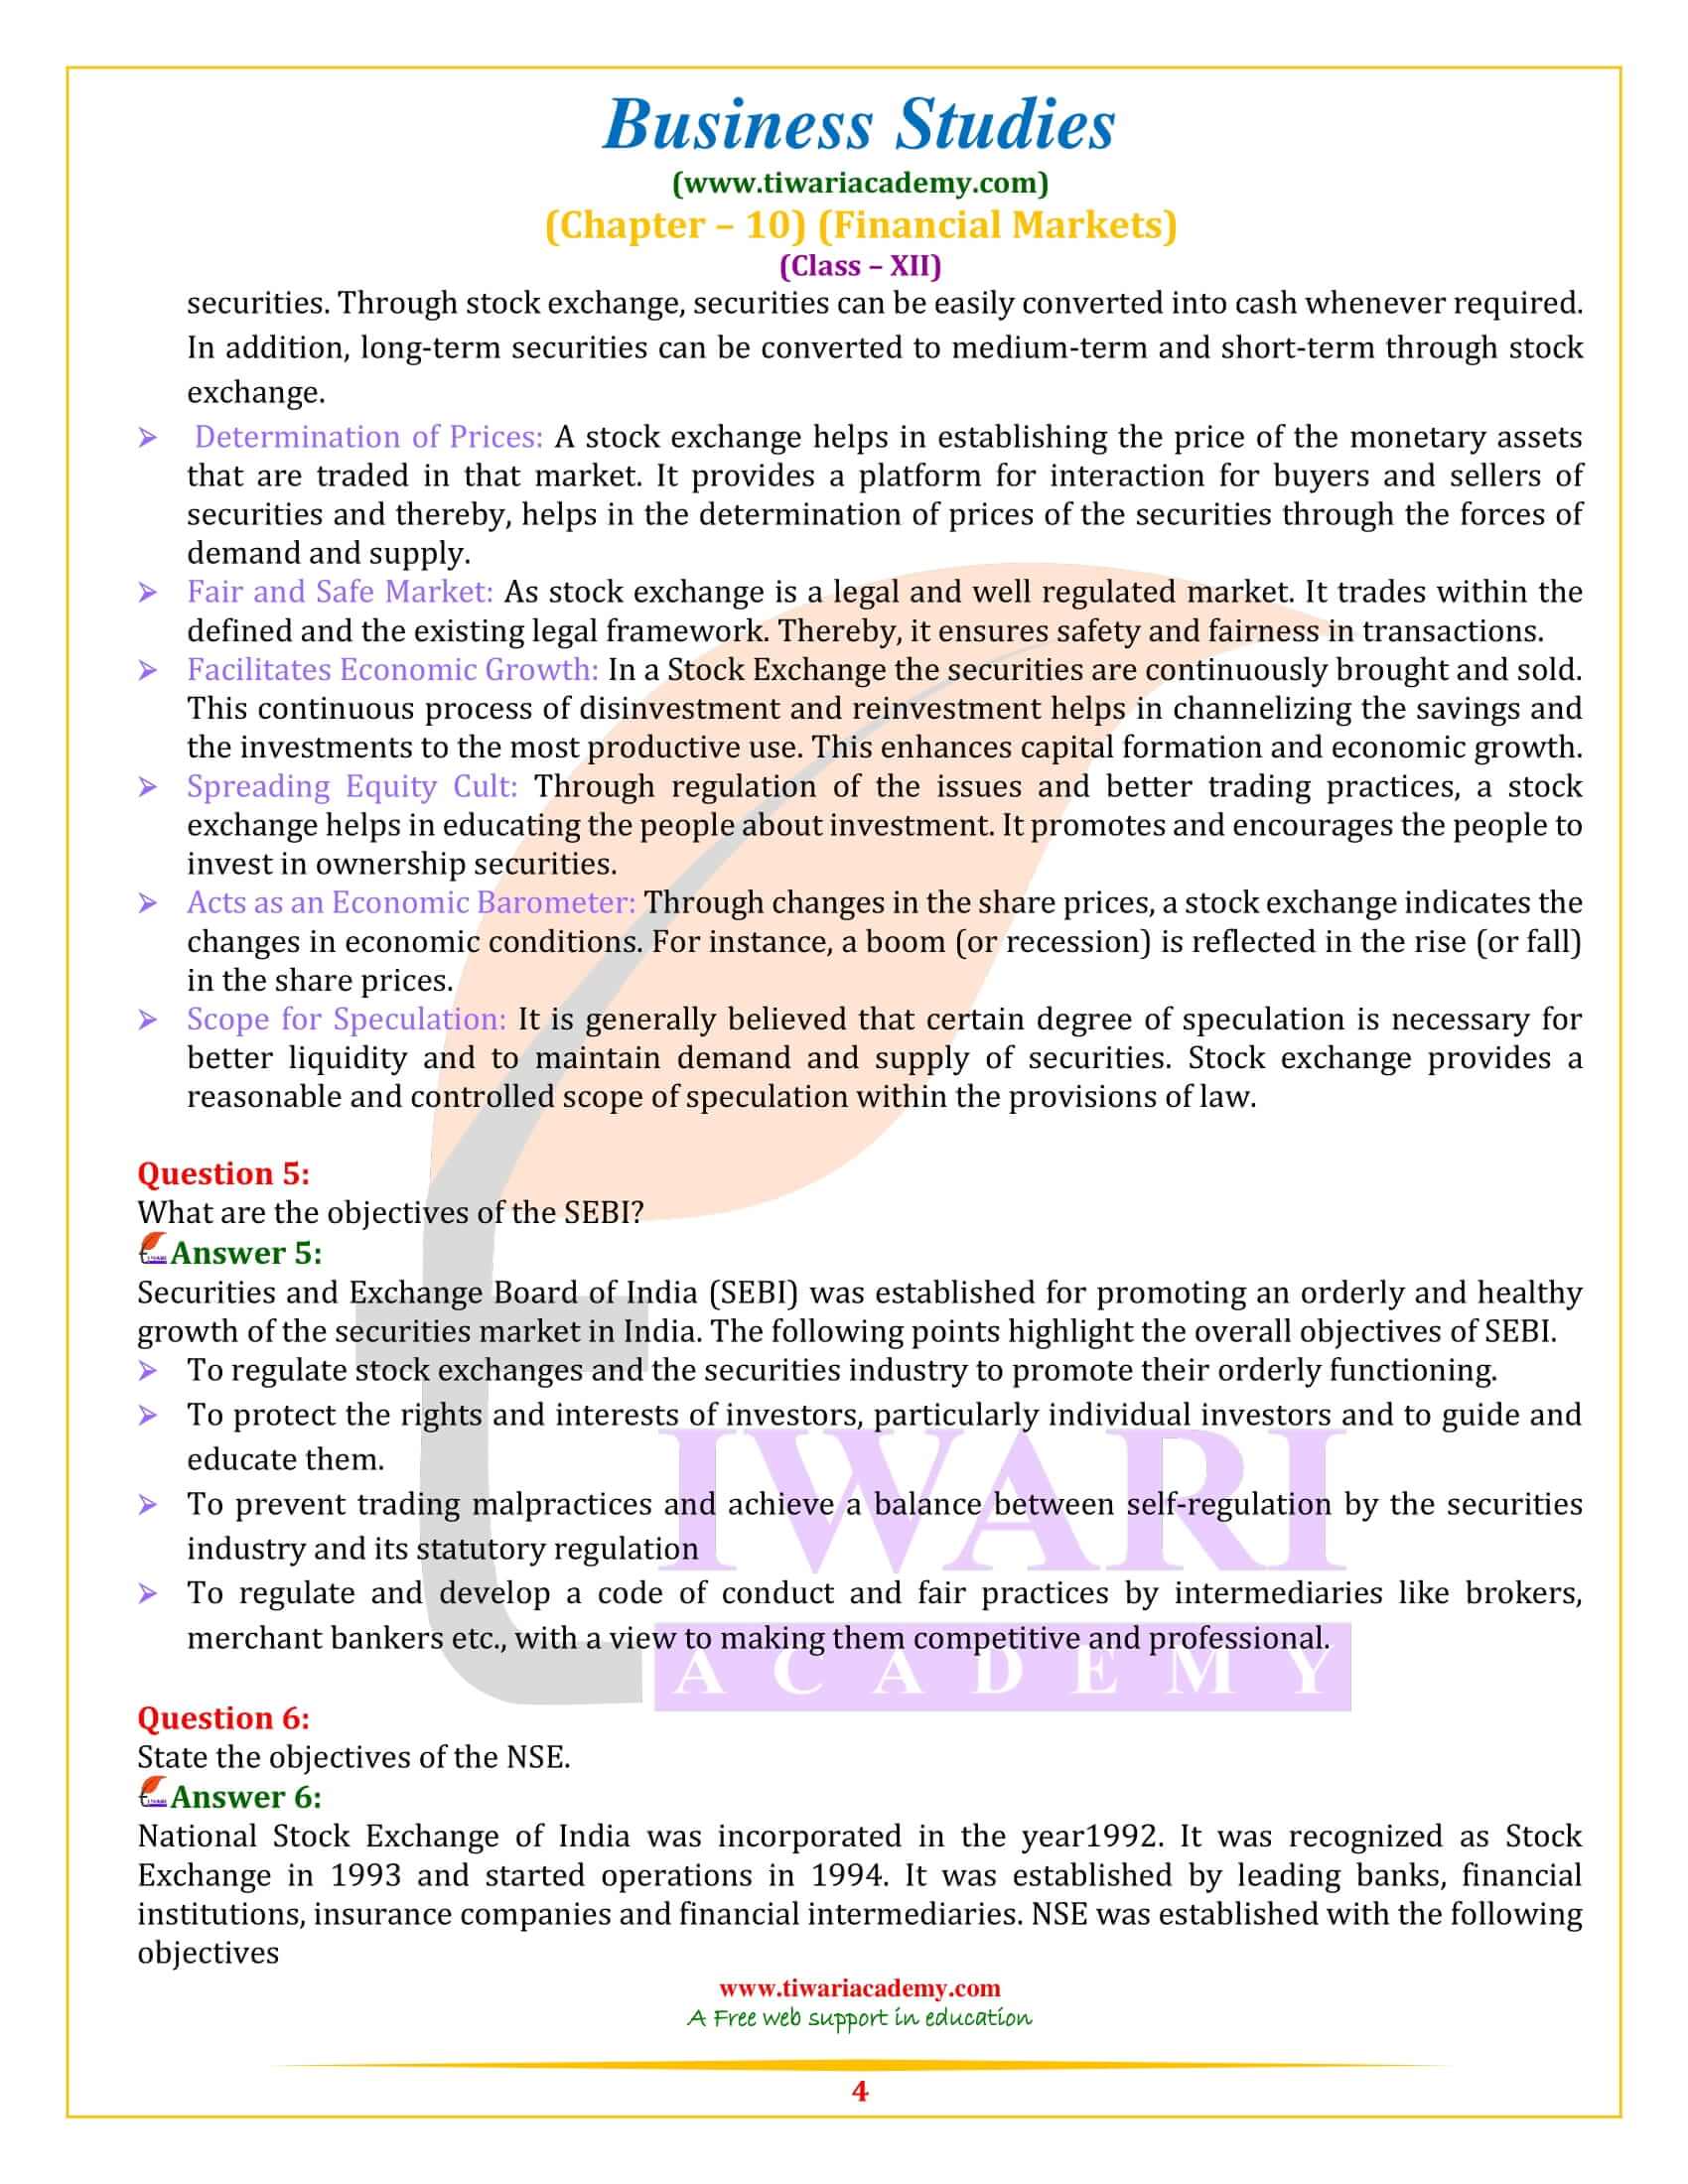 NCERT Solutions for Class 12 Business Studies Chapter 10 in English Medium